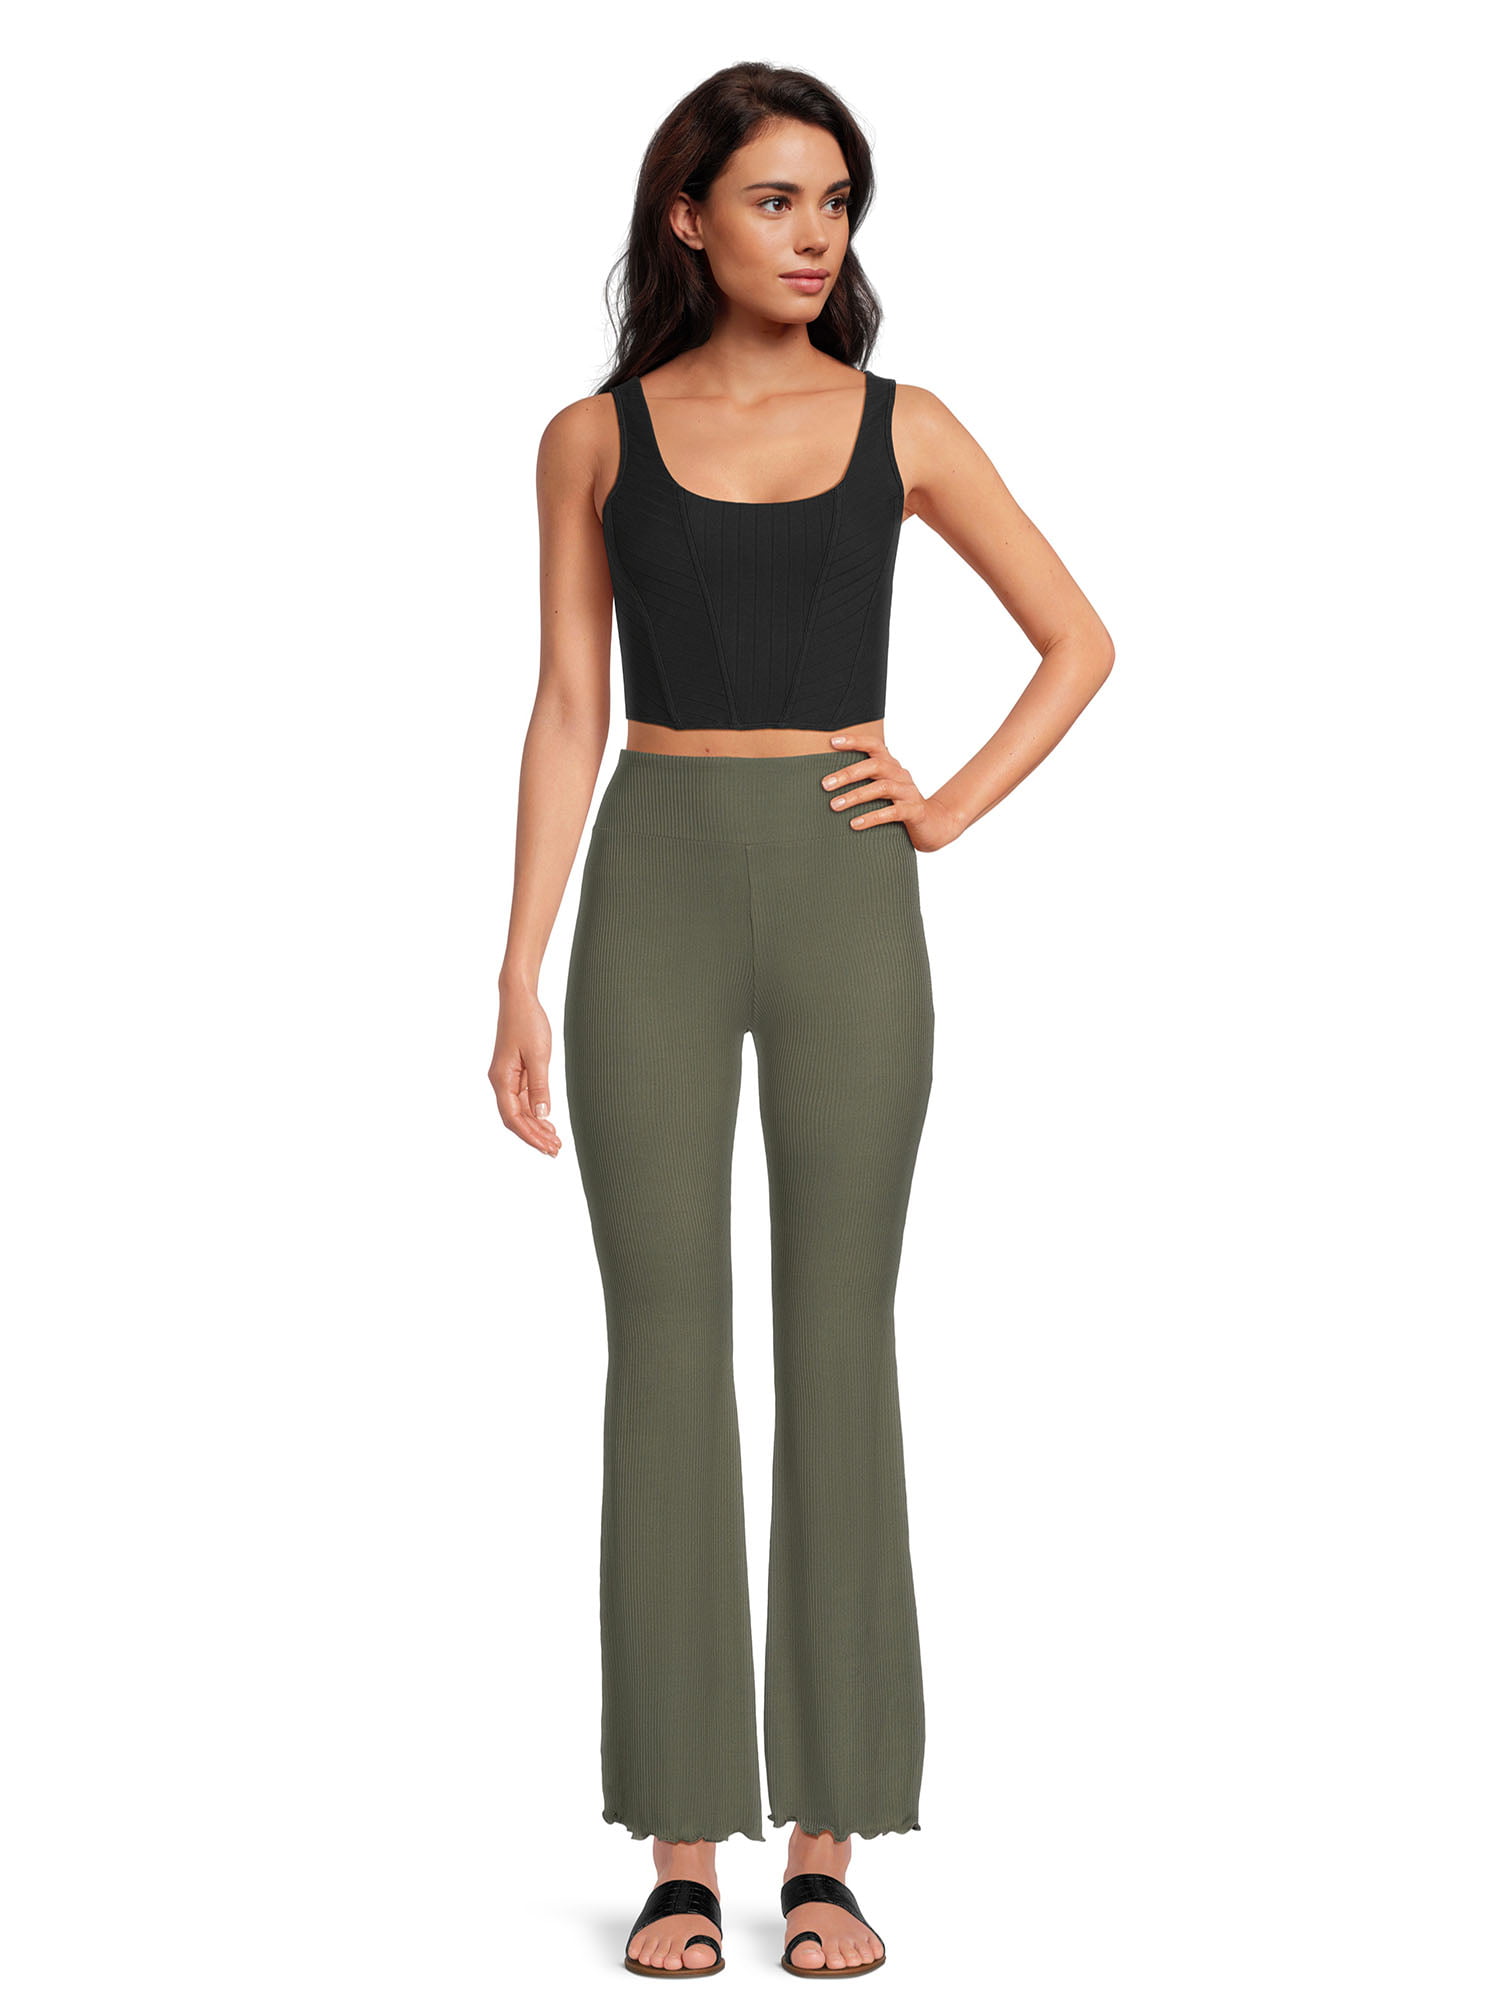 No Boundaries Army Green Flare Leggings Size M - $8 (46% Off